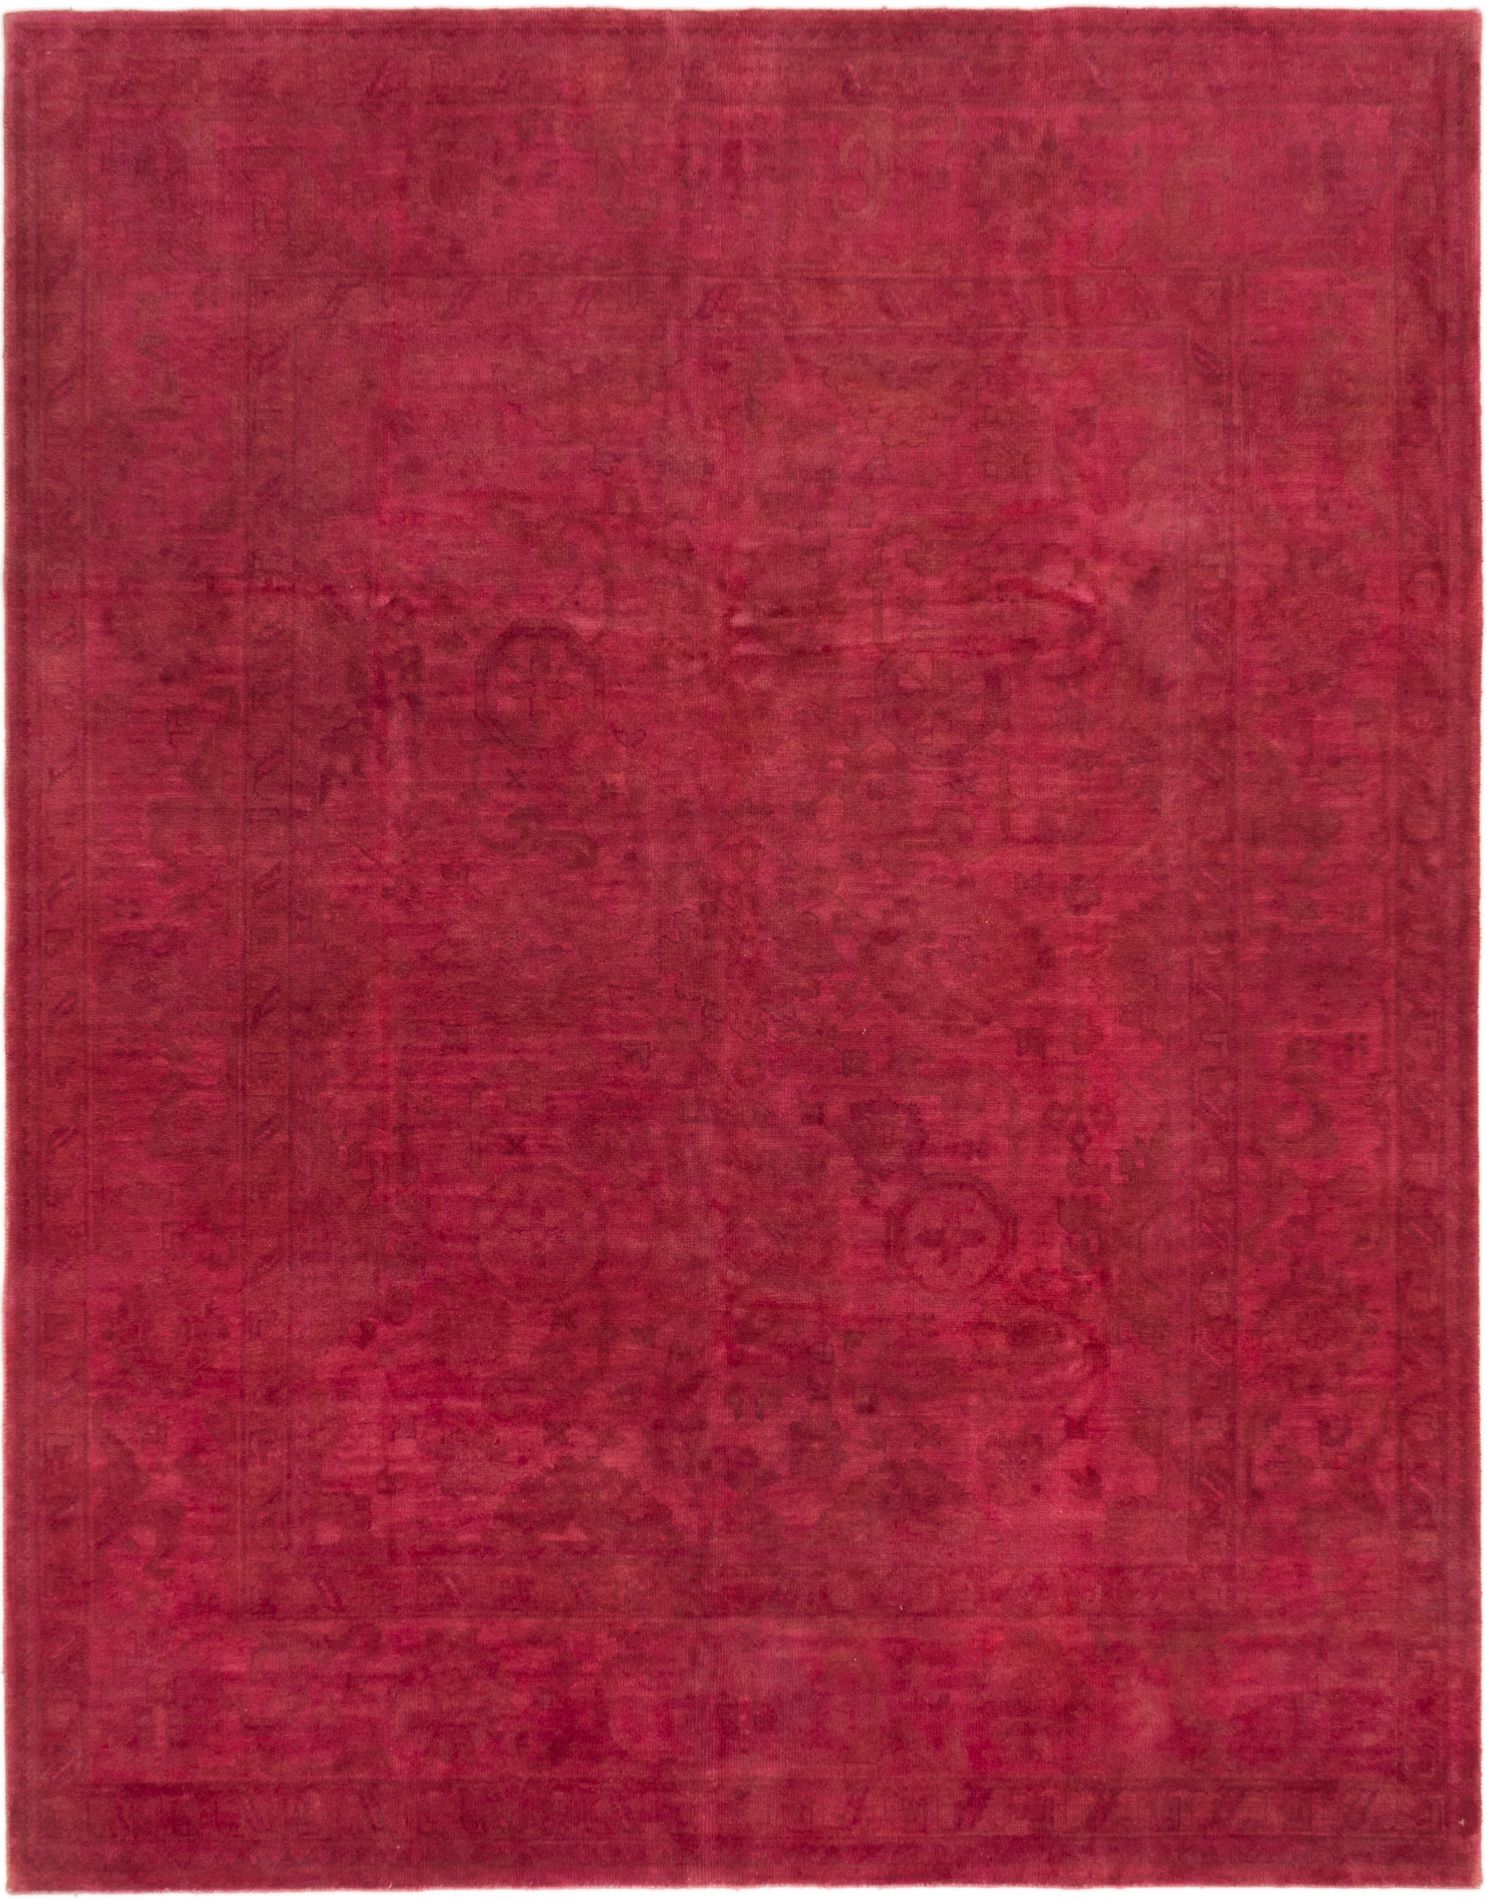 Hand-knotted Color transition Dark Pink Wool Rug 7'8" x 9'8" Size: 7'8" x 9'8"  